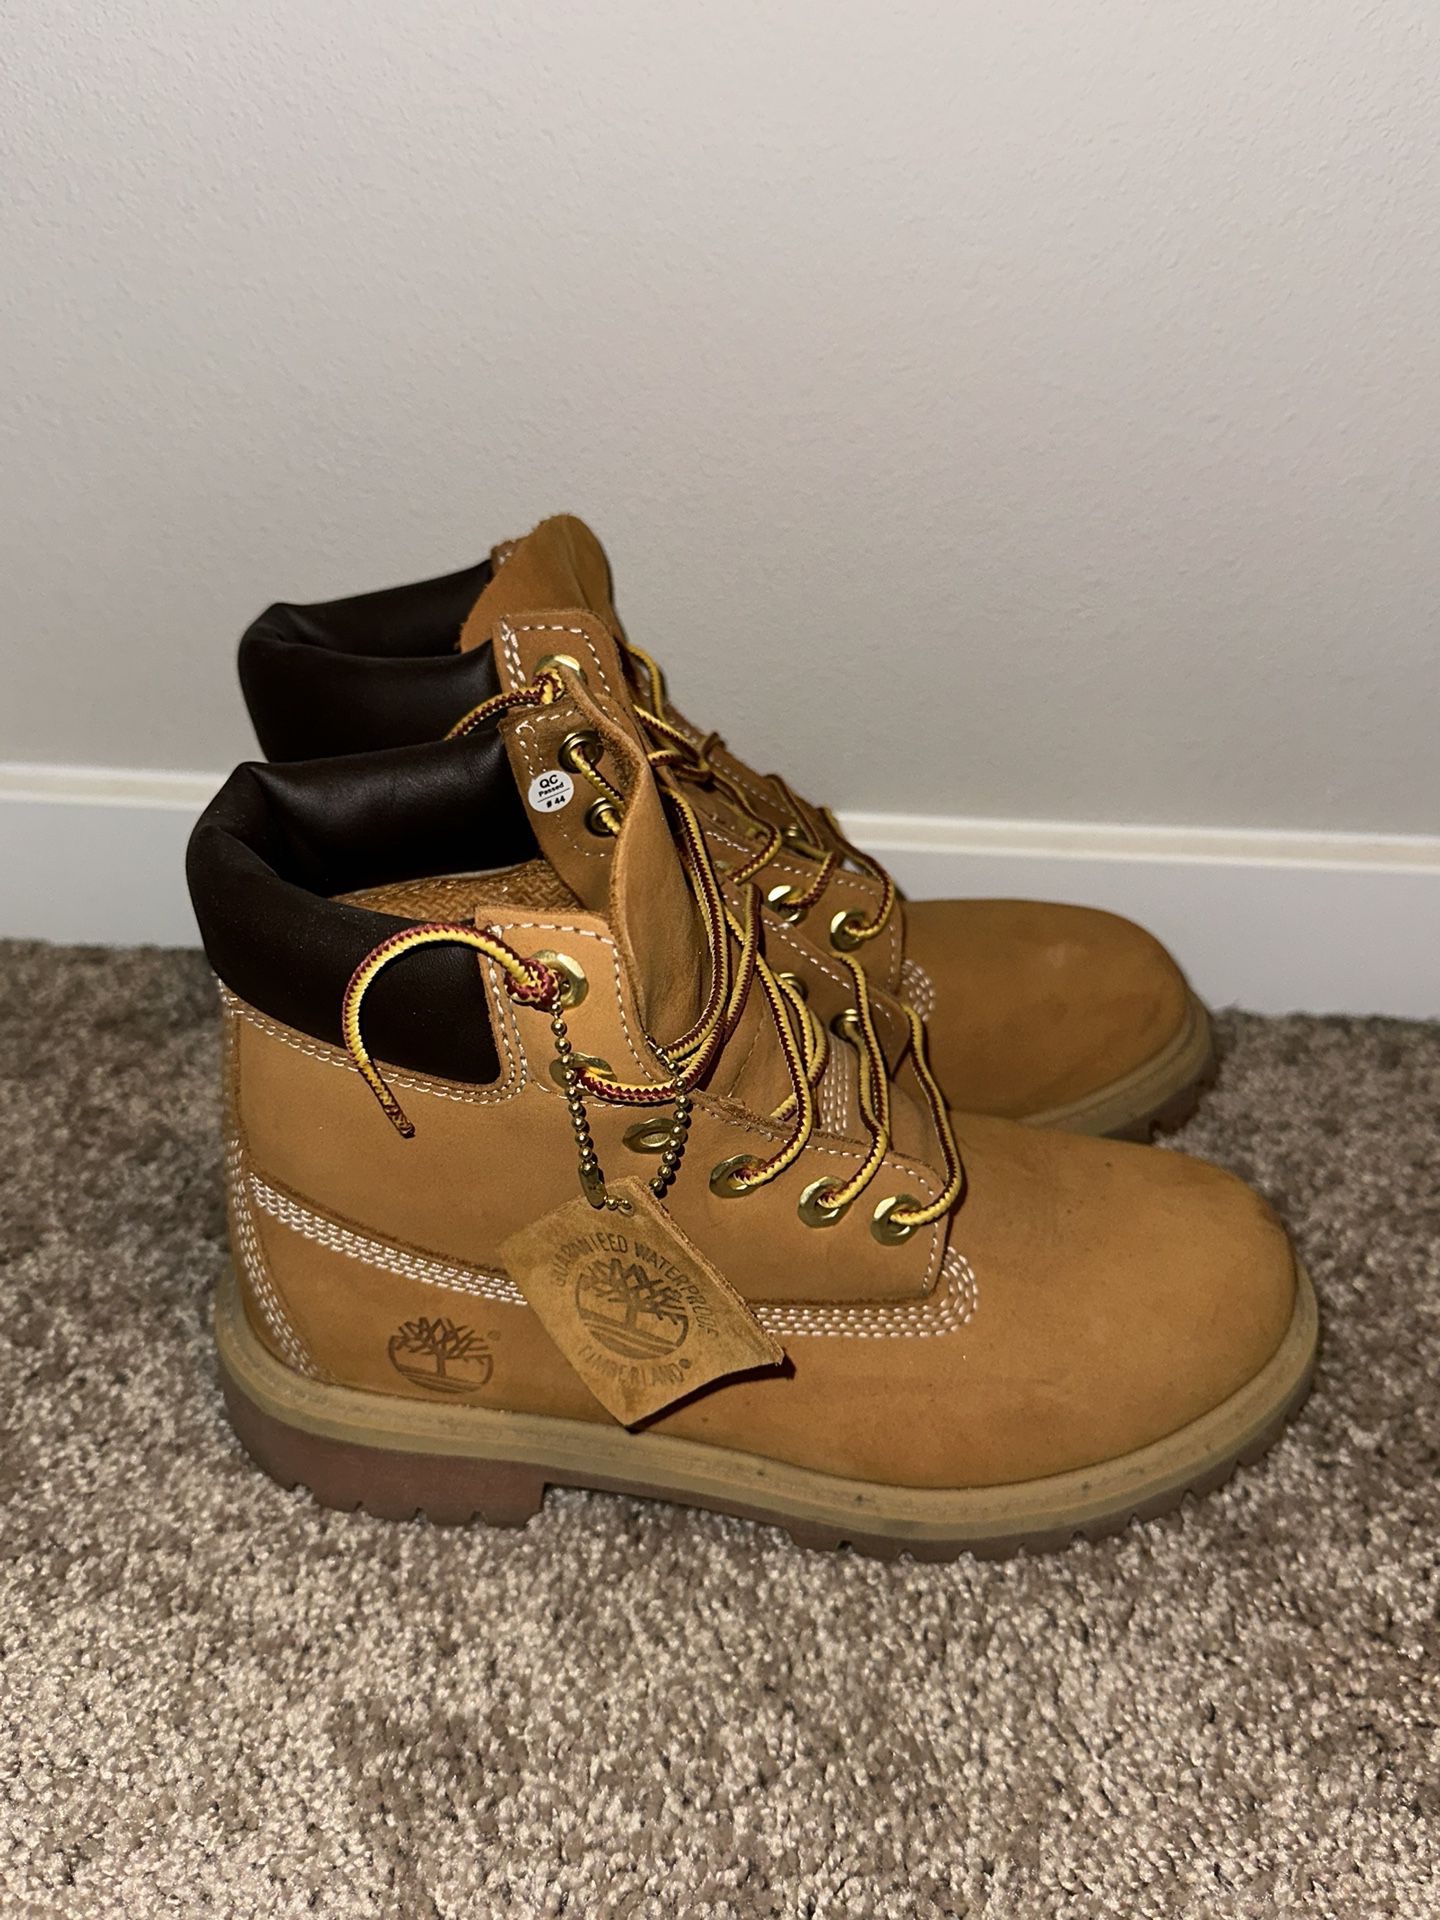 Timberlands - New Without Box